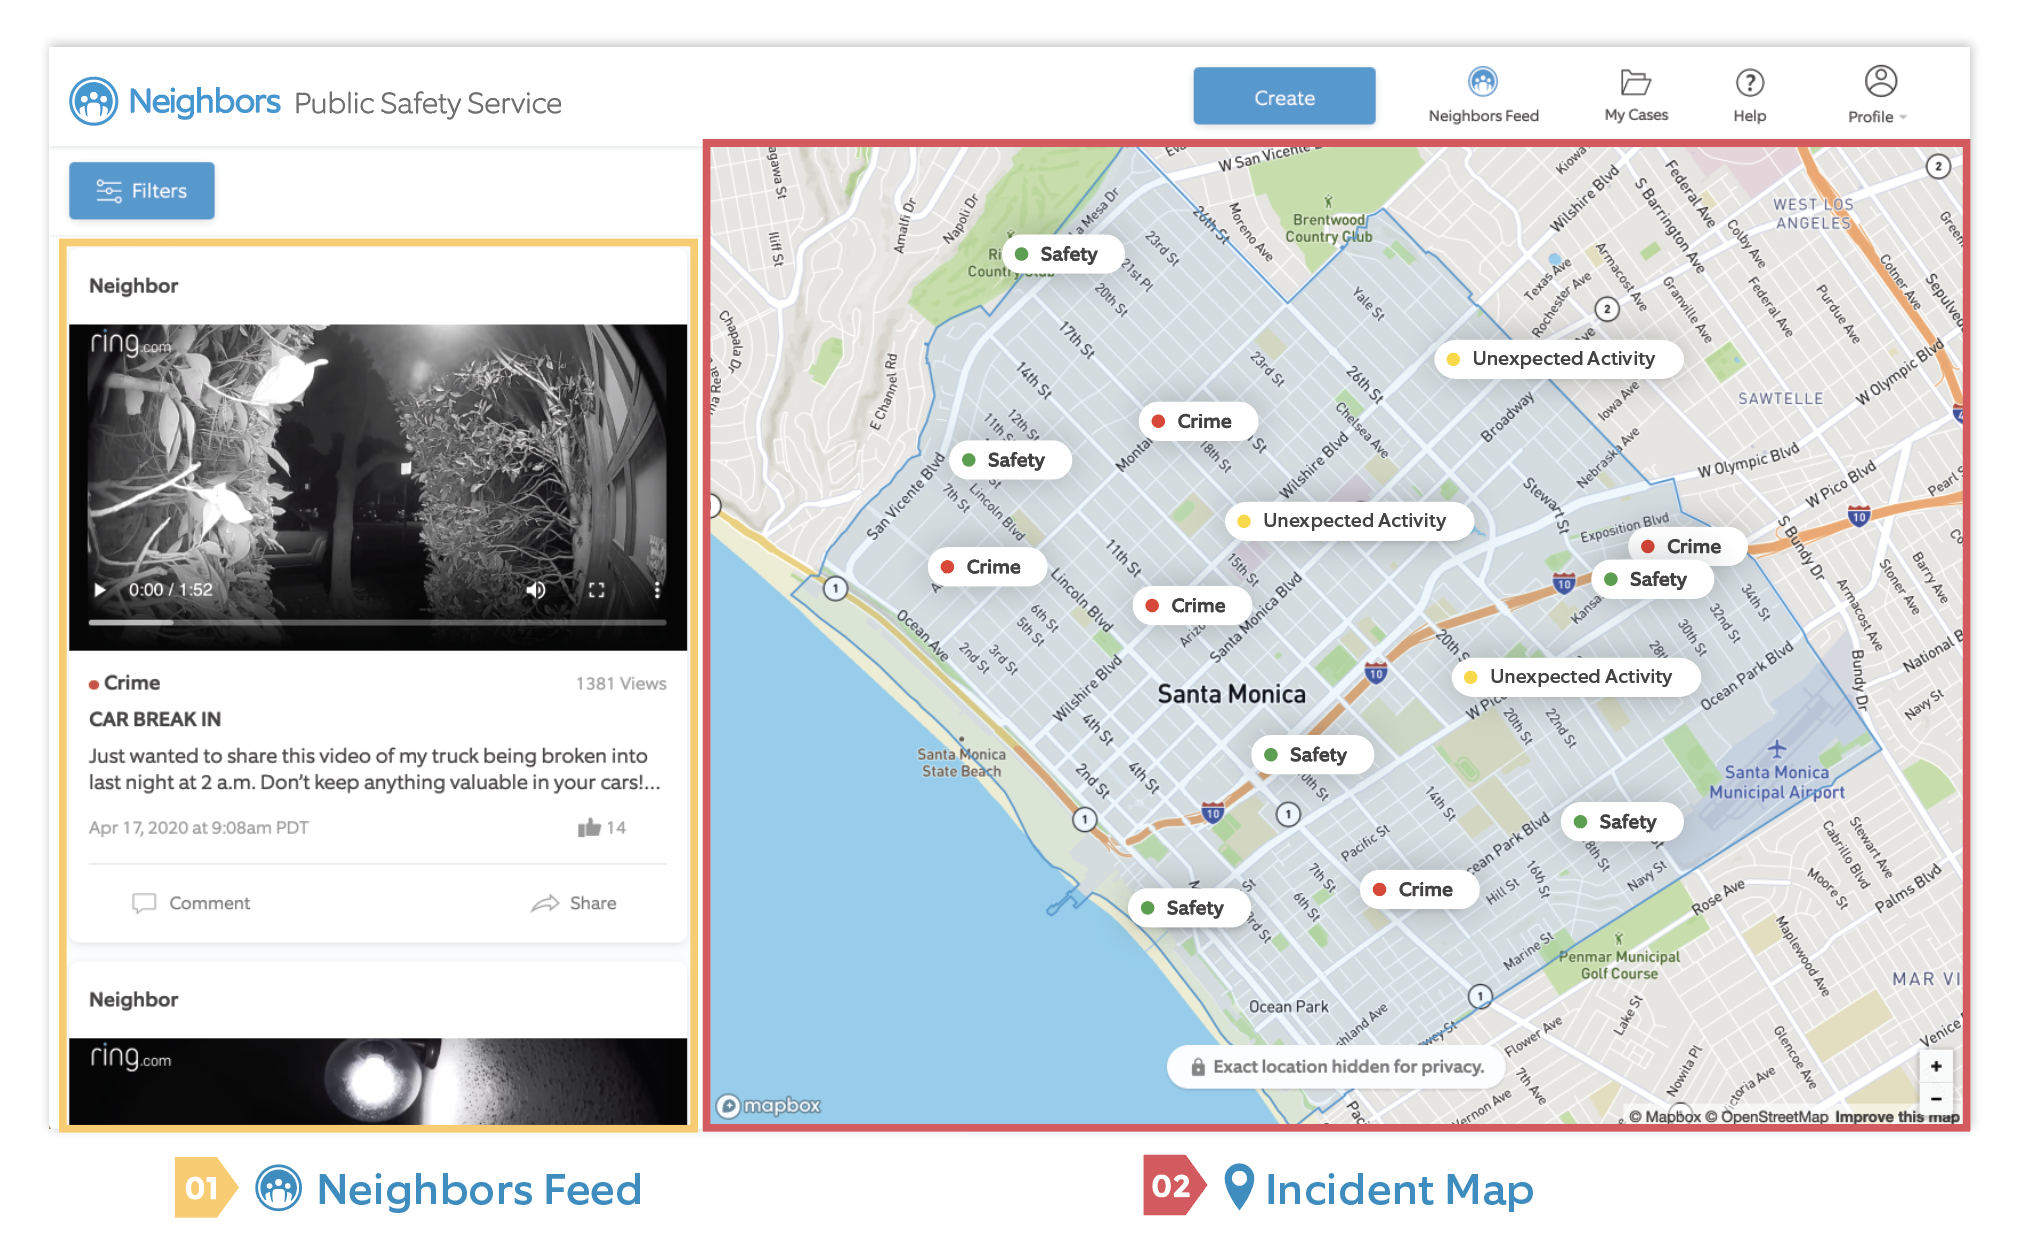 NPSS_Feed_and_Incident_Map.png